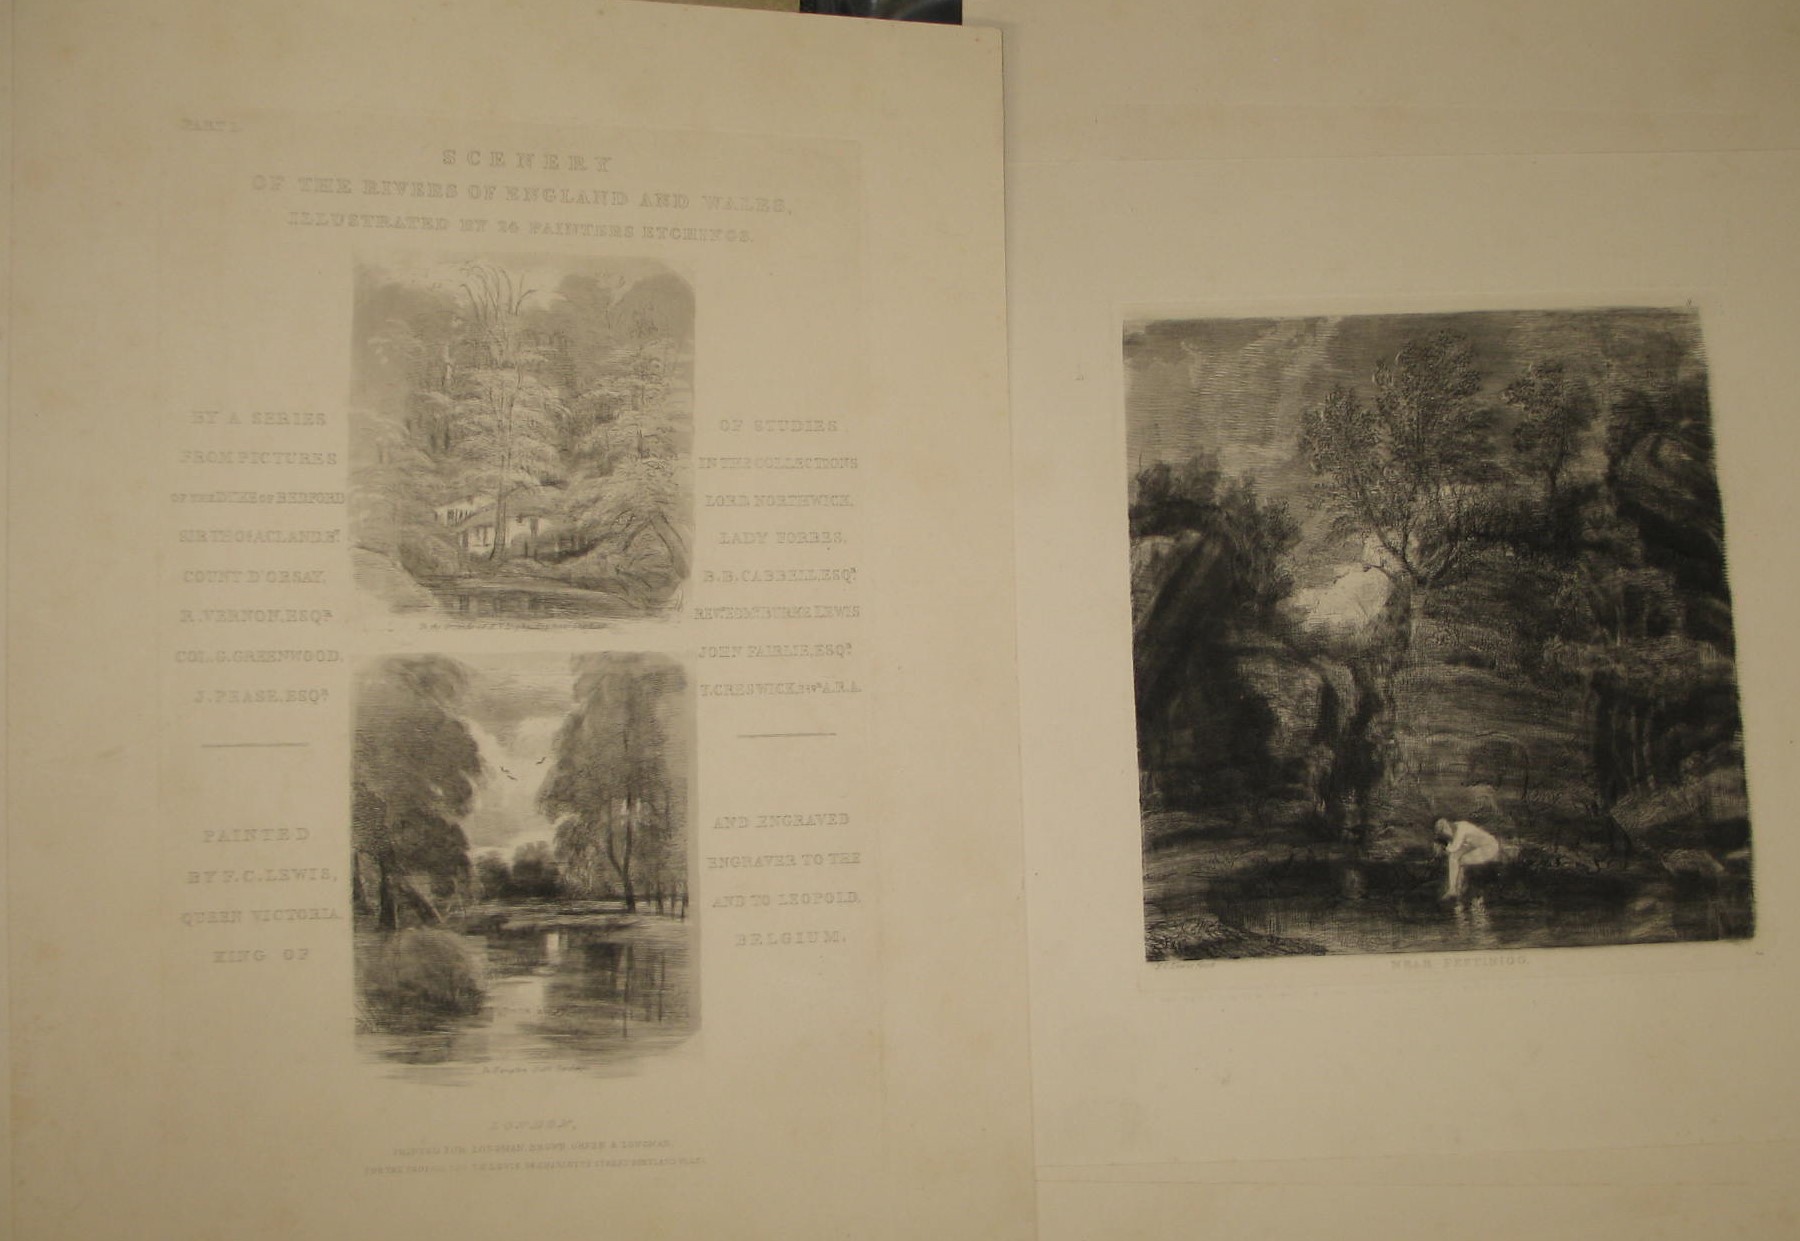 LEWIS (F. C.) a collection of title-pages and plates, unbound, for his "Scenery of the Rivers",